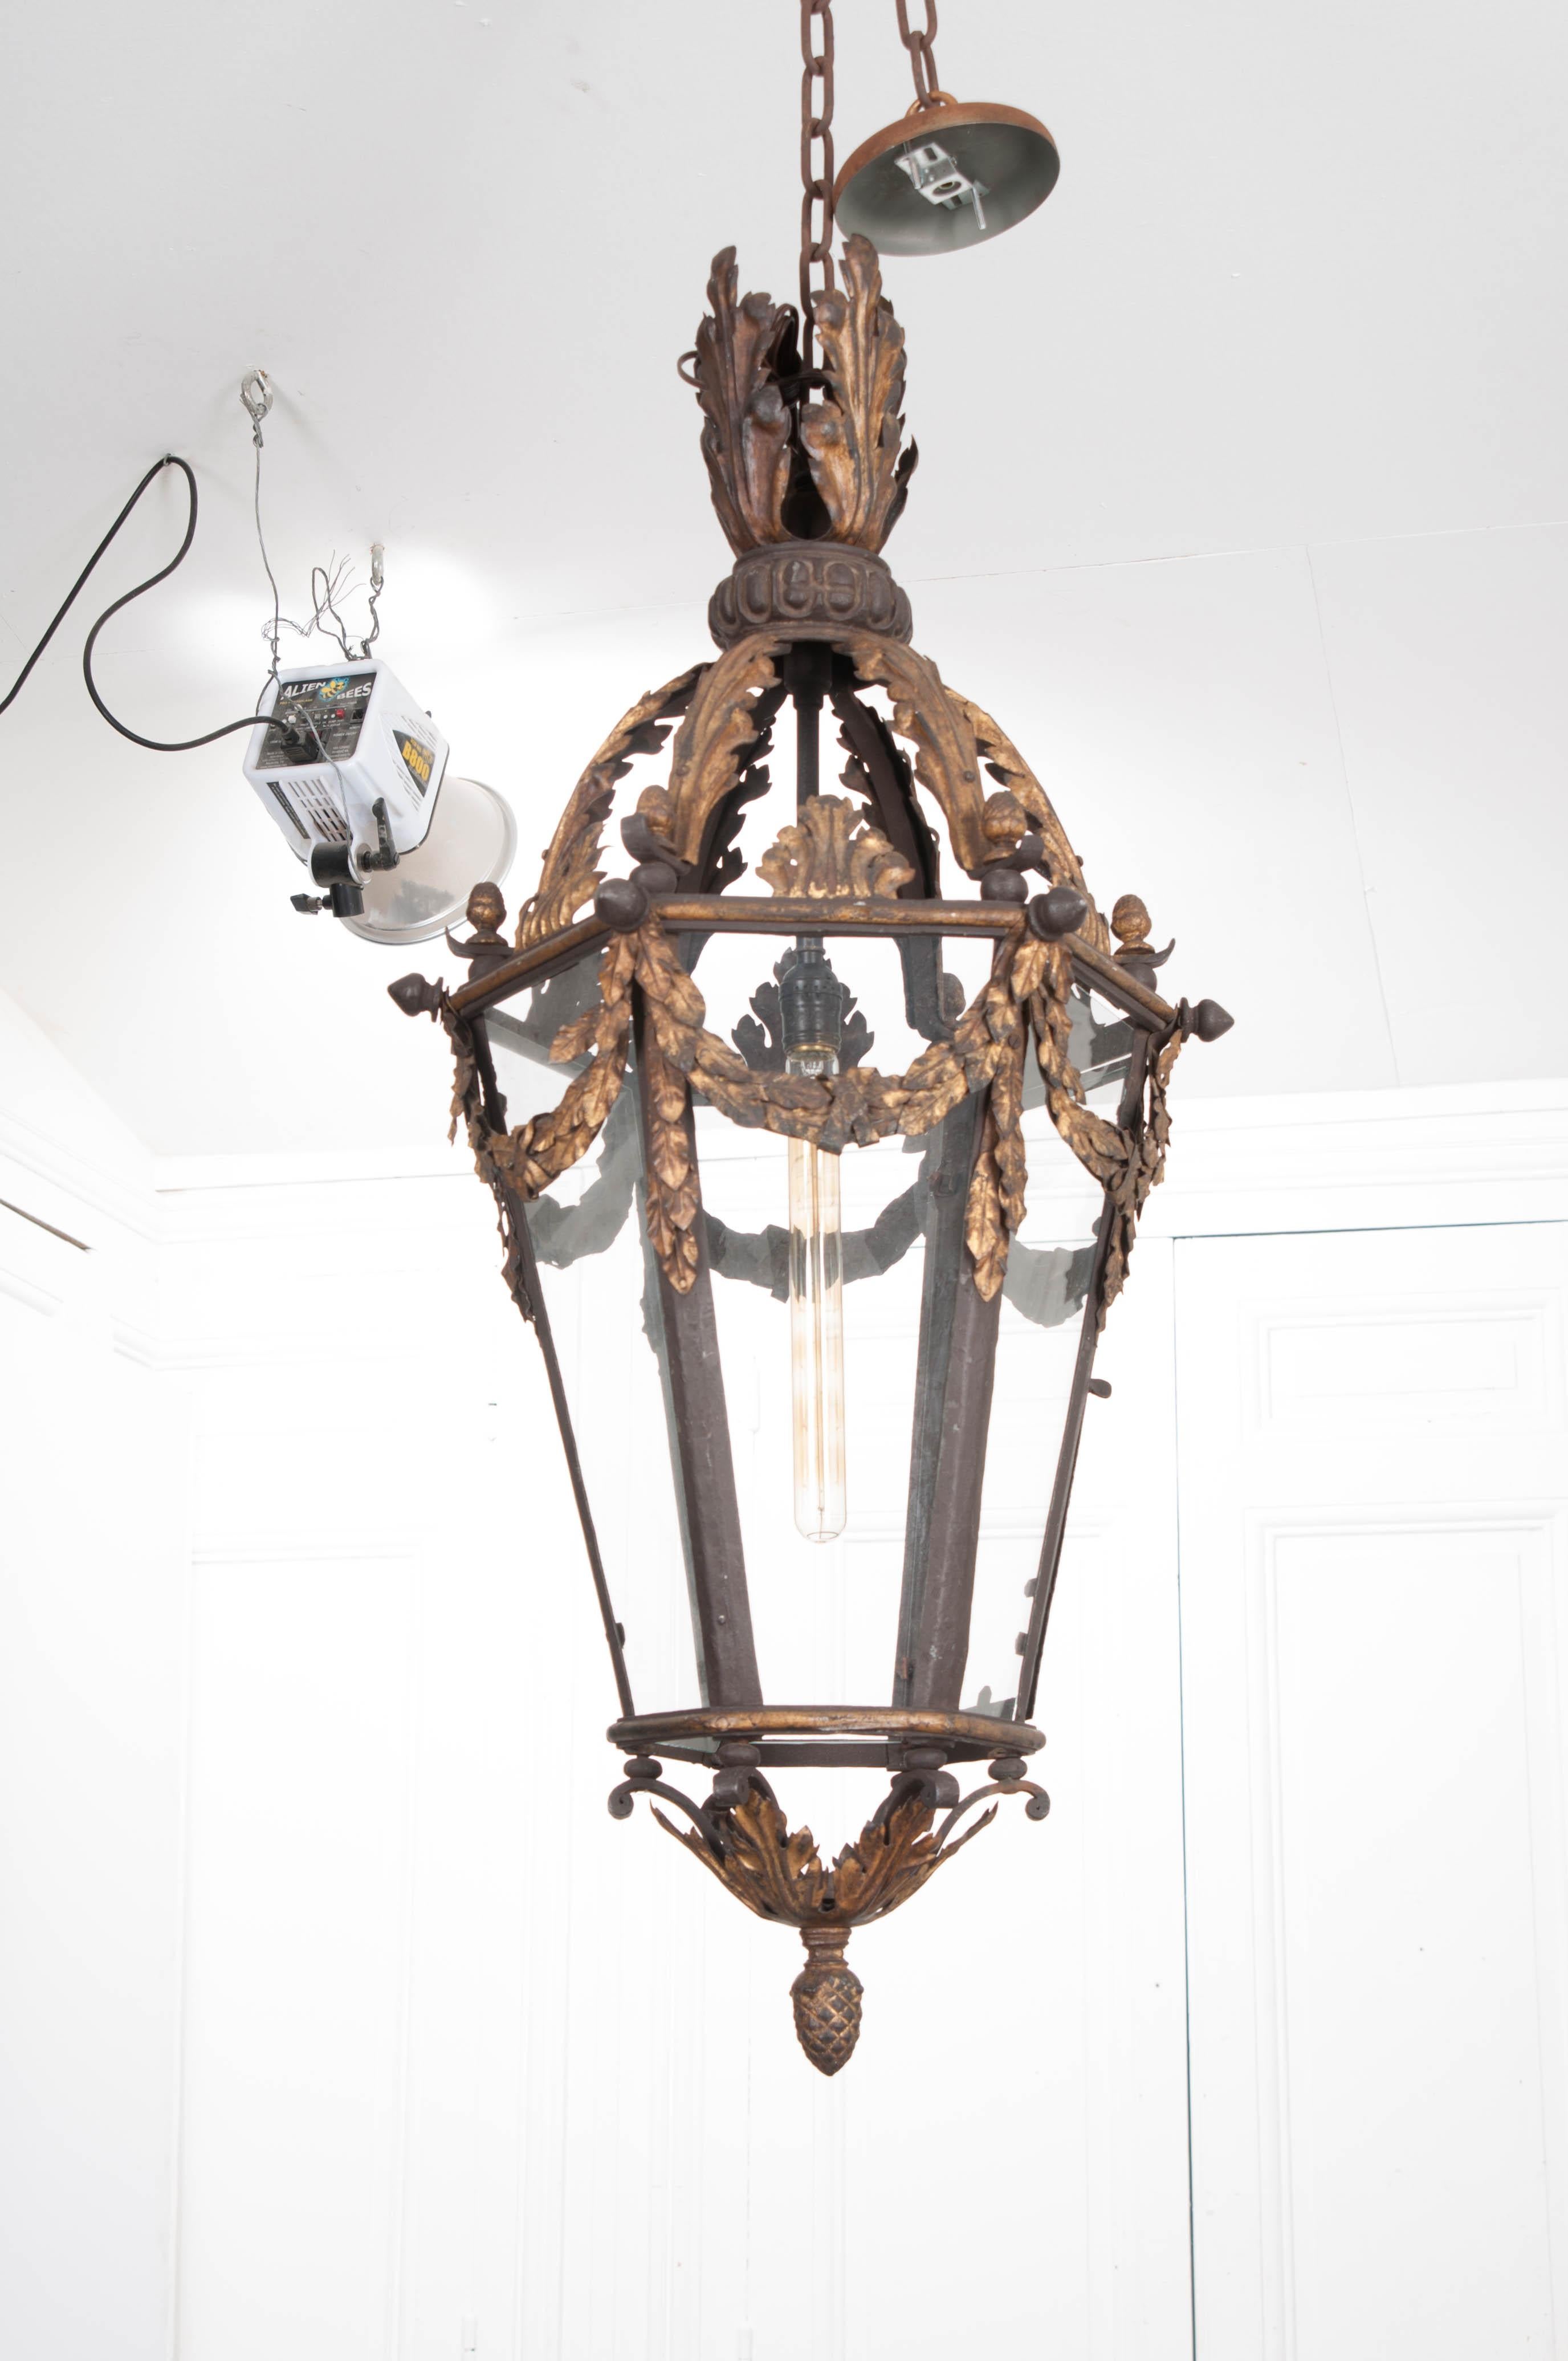 French 19th Century Iron and Gilt-Brass Single-Light Lantern In Good Condition For Sale In Baton Rouge, LA